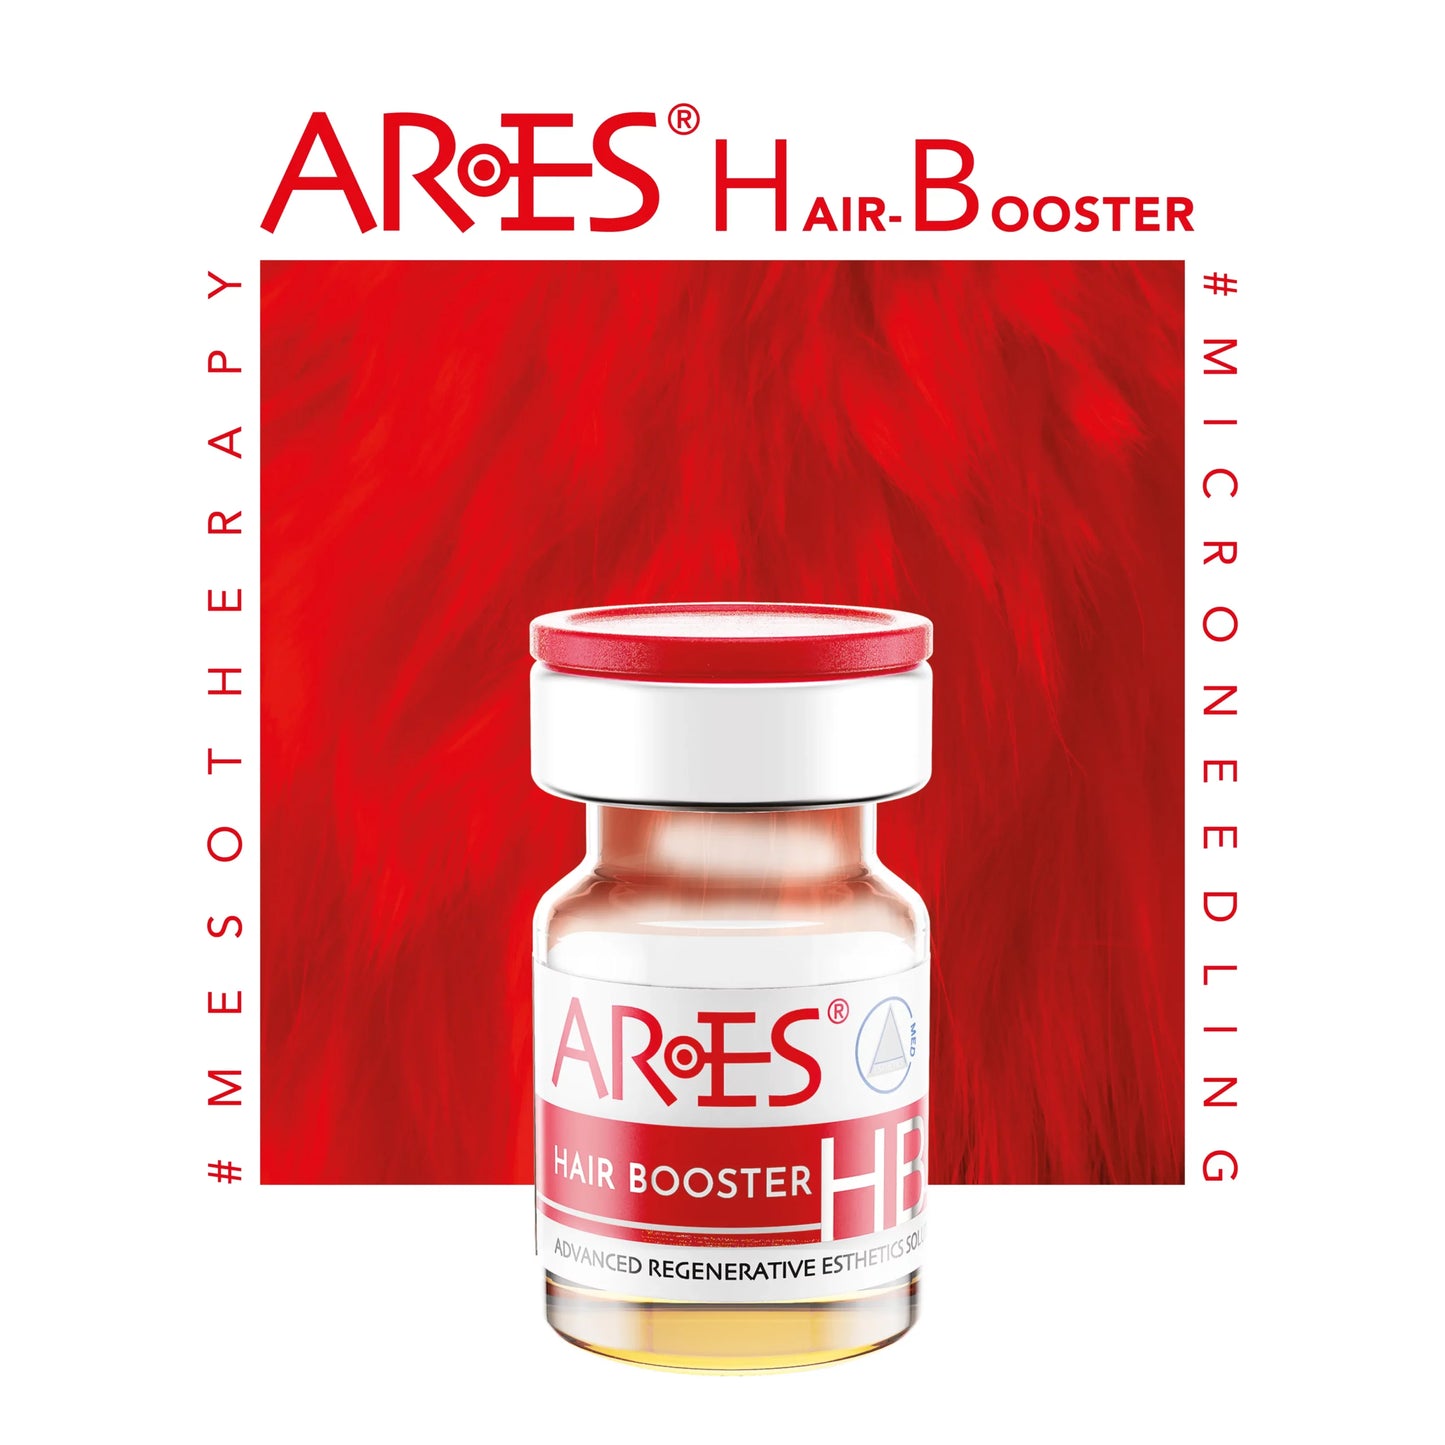 Ares HB Hair Booster